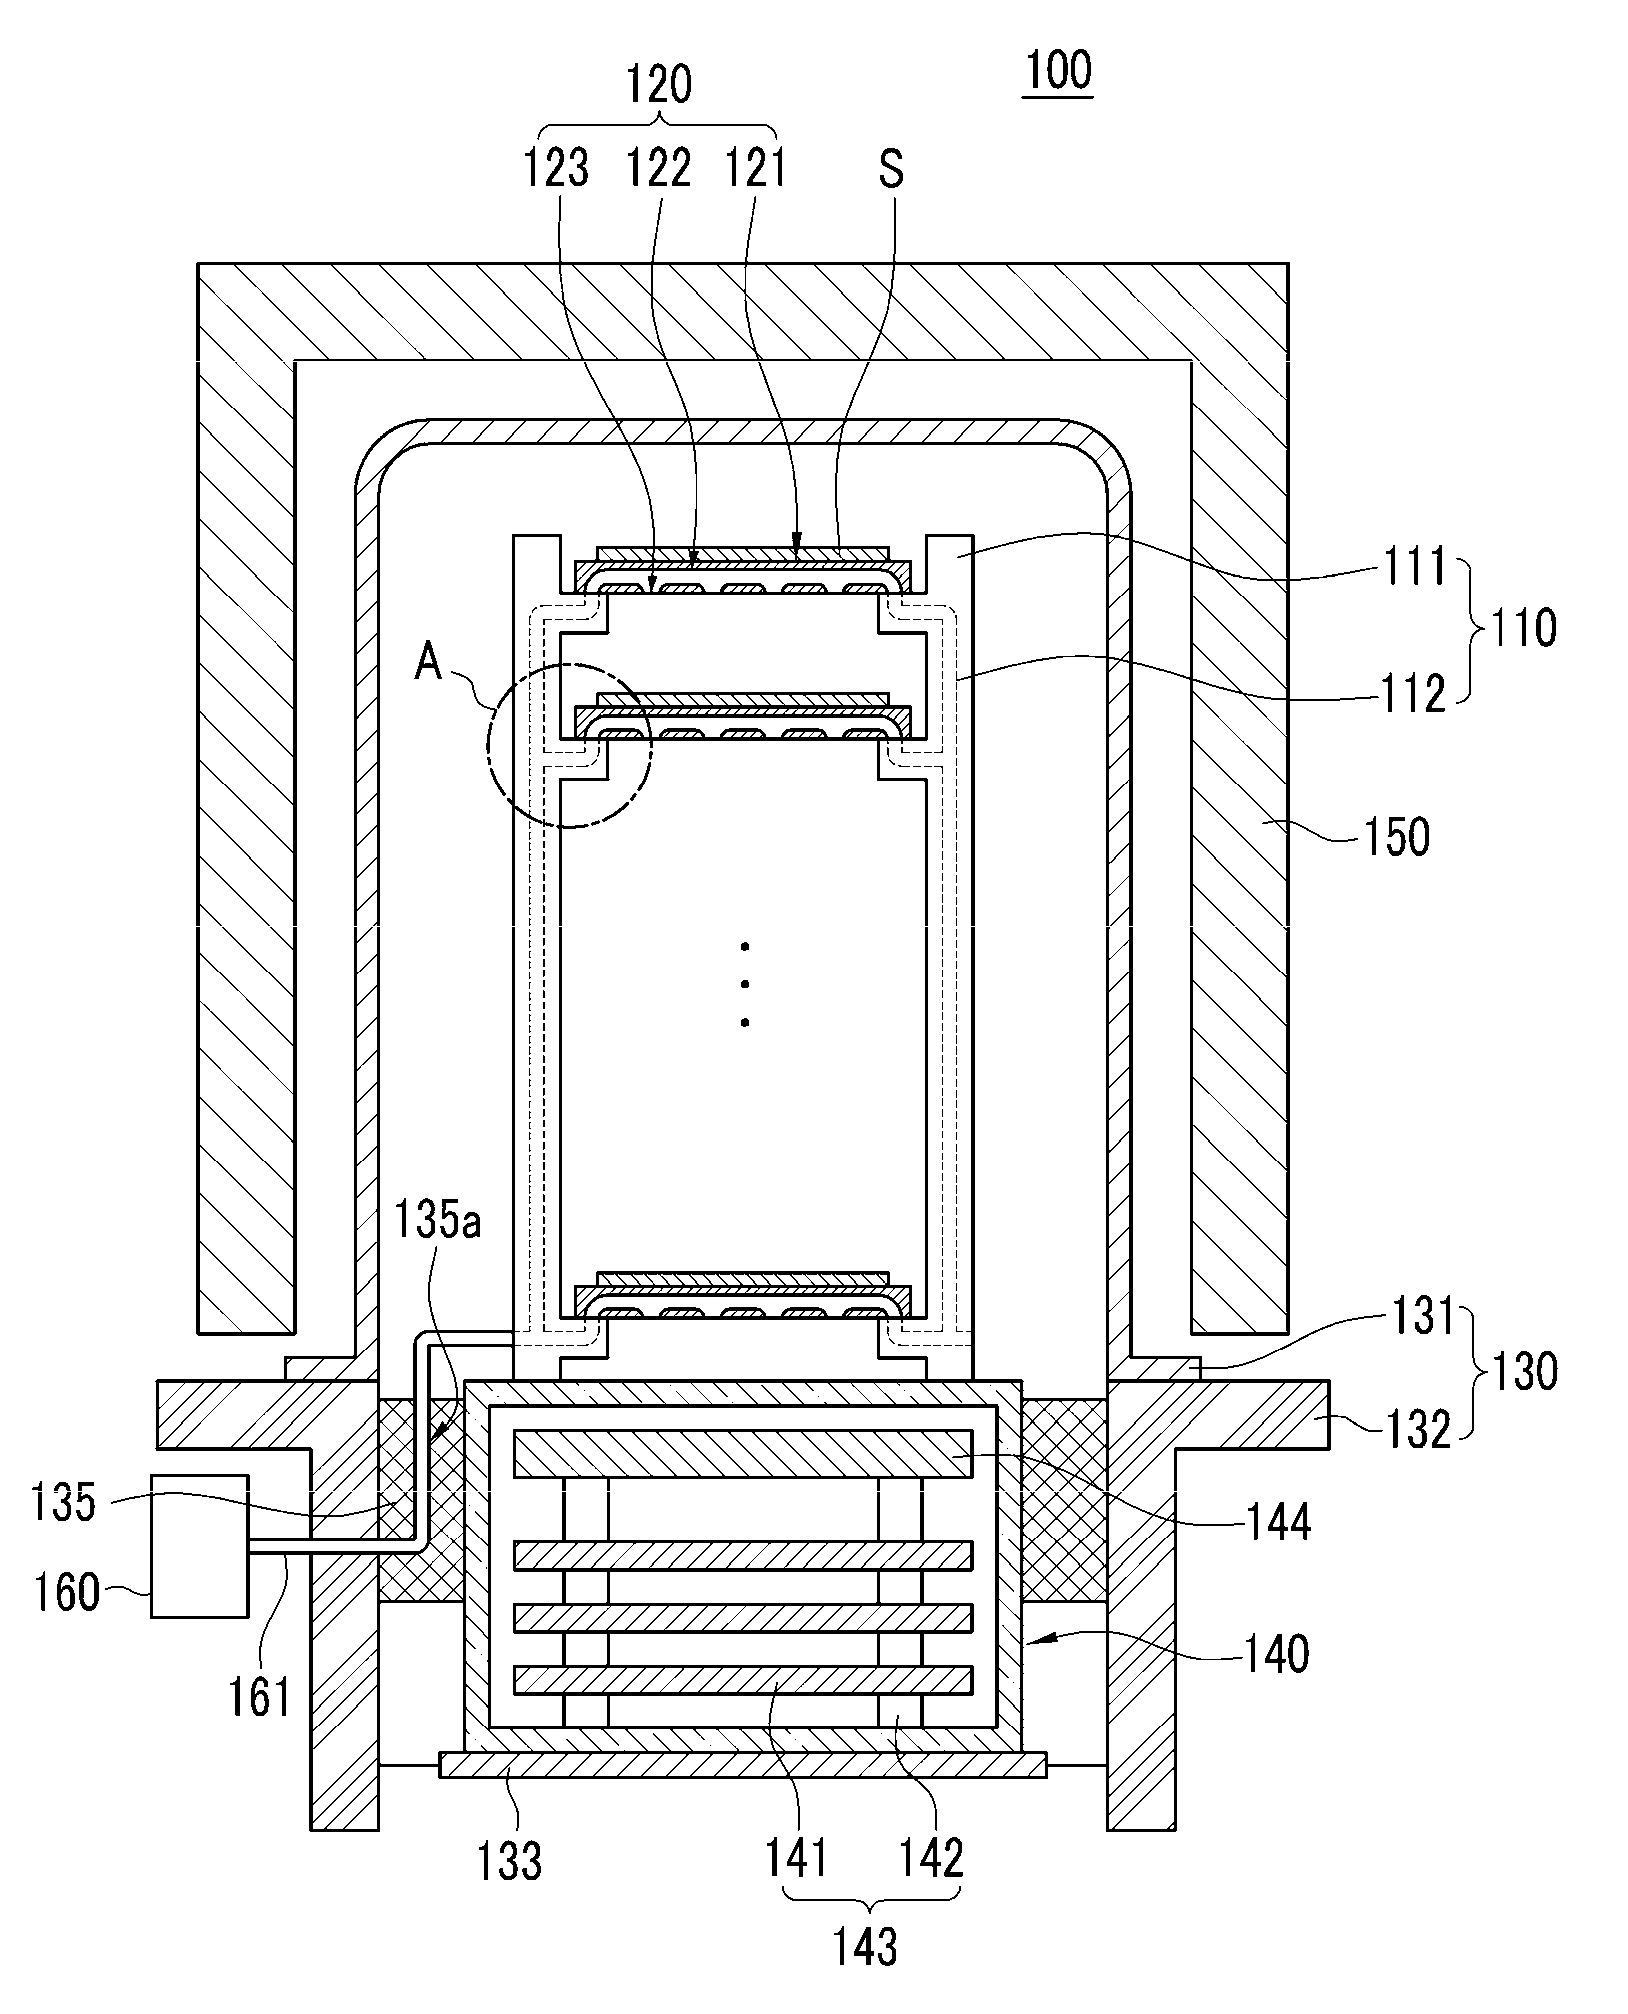 Apparatus for Processing Substrate